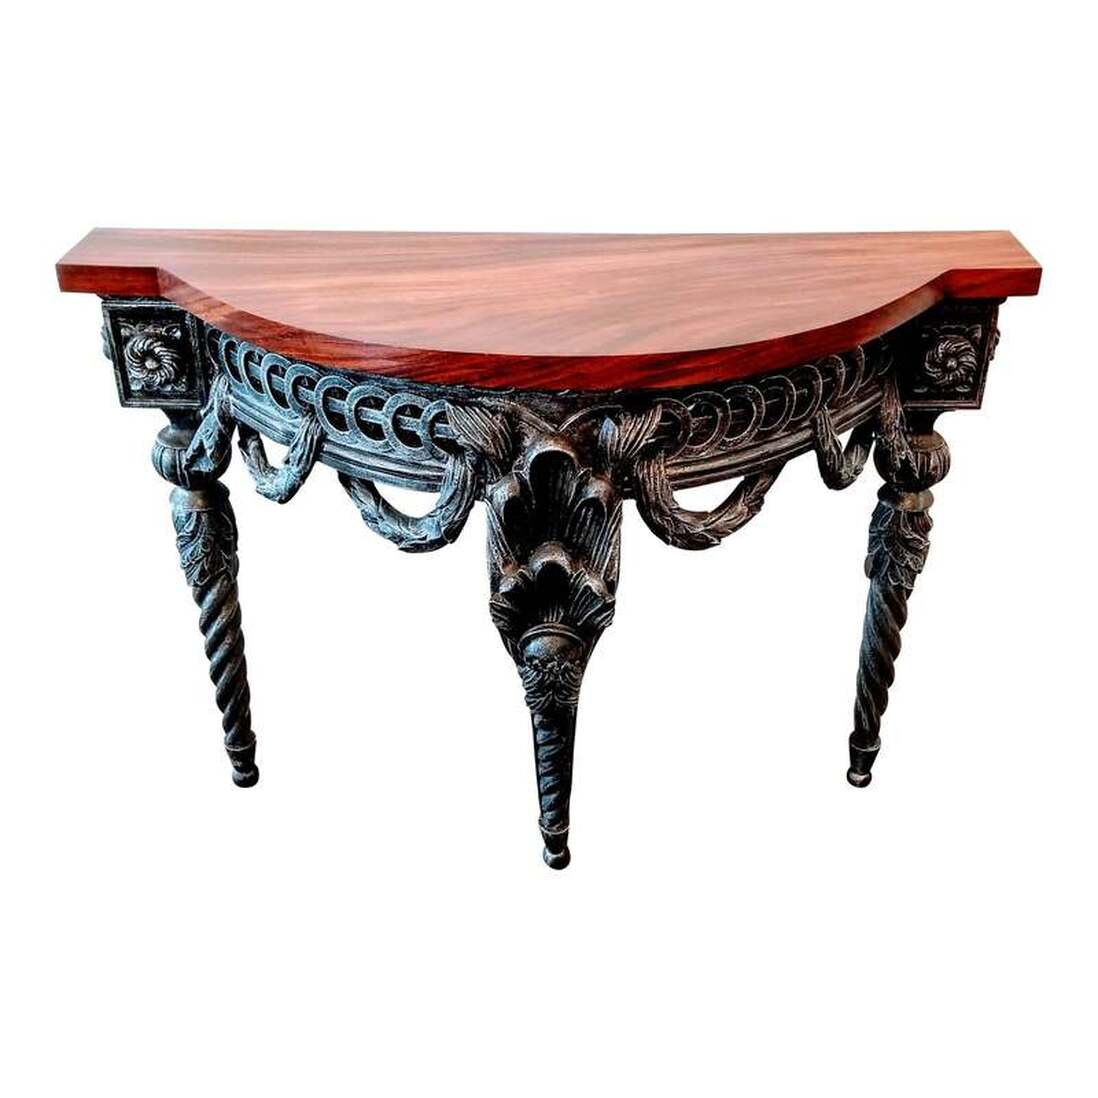 Baroque pier table base from Italy was manufactured in the 1990s for the designer market. We added a shaped cocobolo wood top to update the look for contemporary interiors.  The base features Italianate Baroque and Neoclassical elements such as spirals, acanthus leaves, rosettes, and laurel leaf swags.